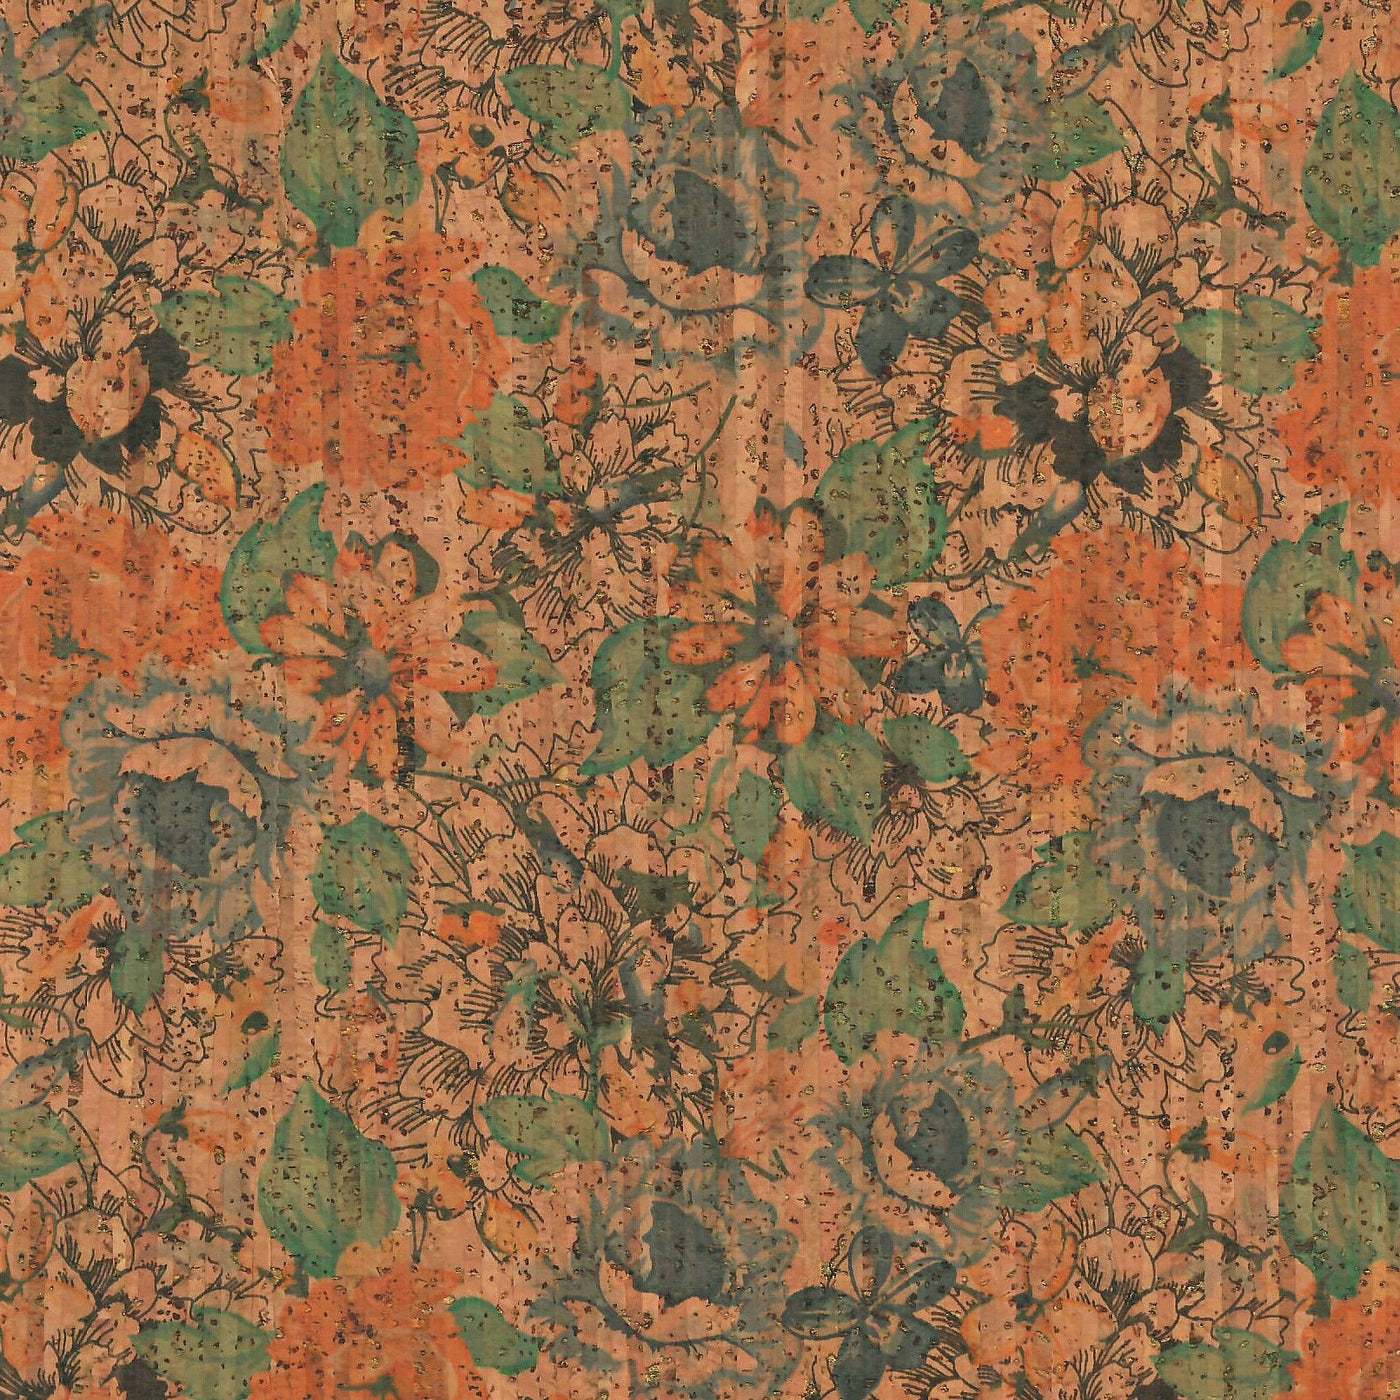 Limited Edition Packaged 1/2 Yard Cut: Fall Bouquet Cork Fabric